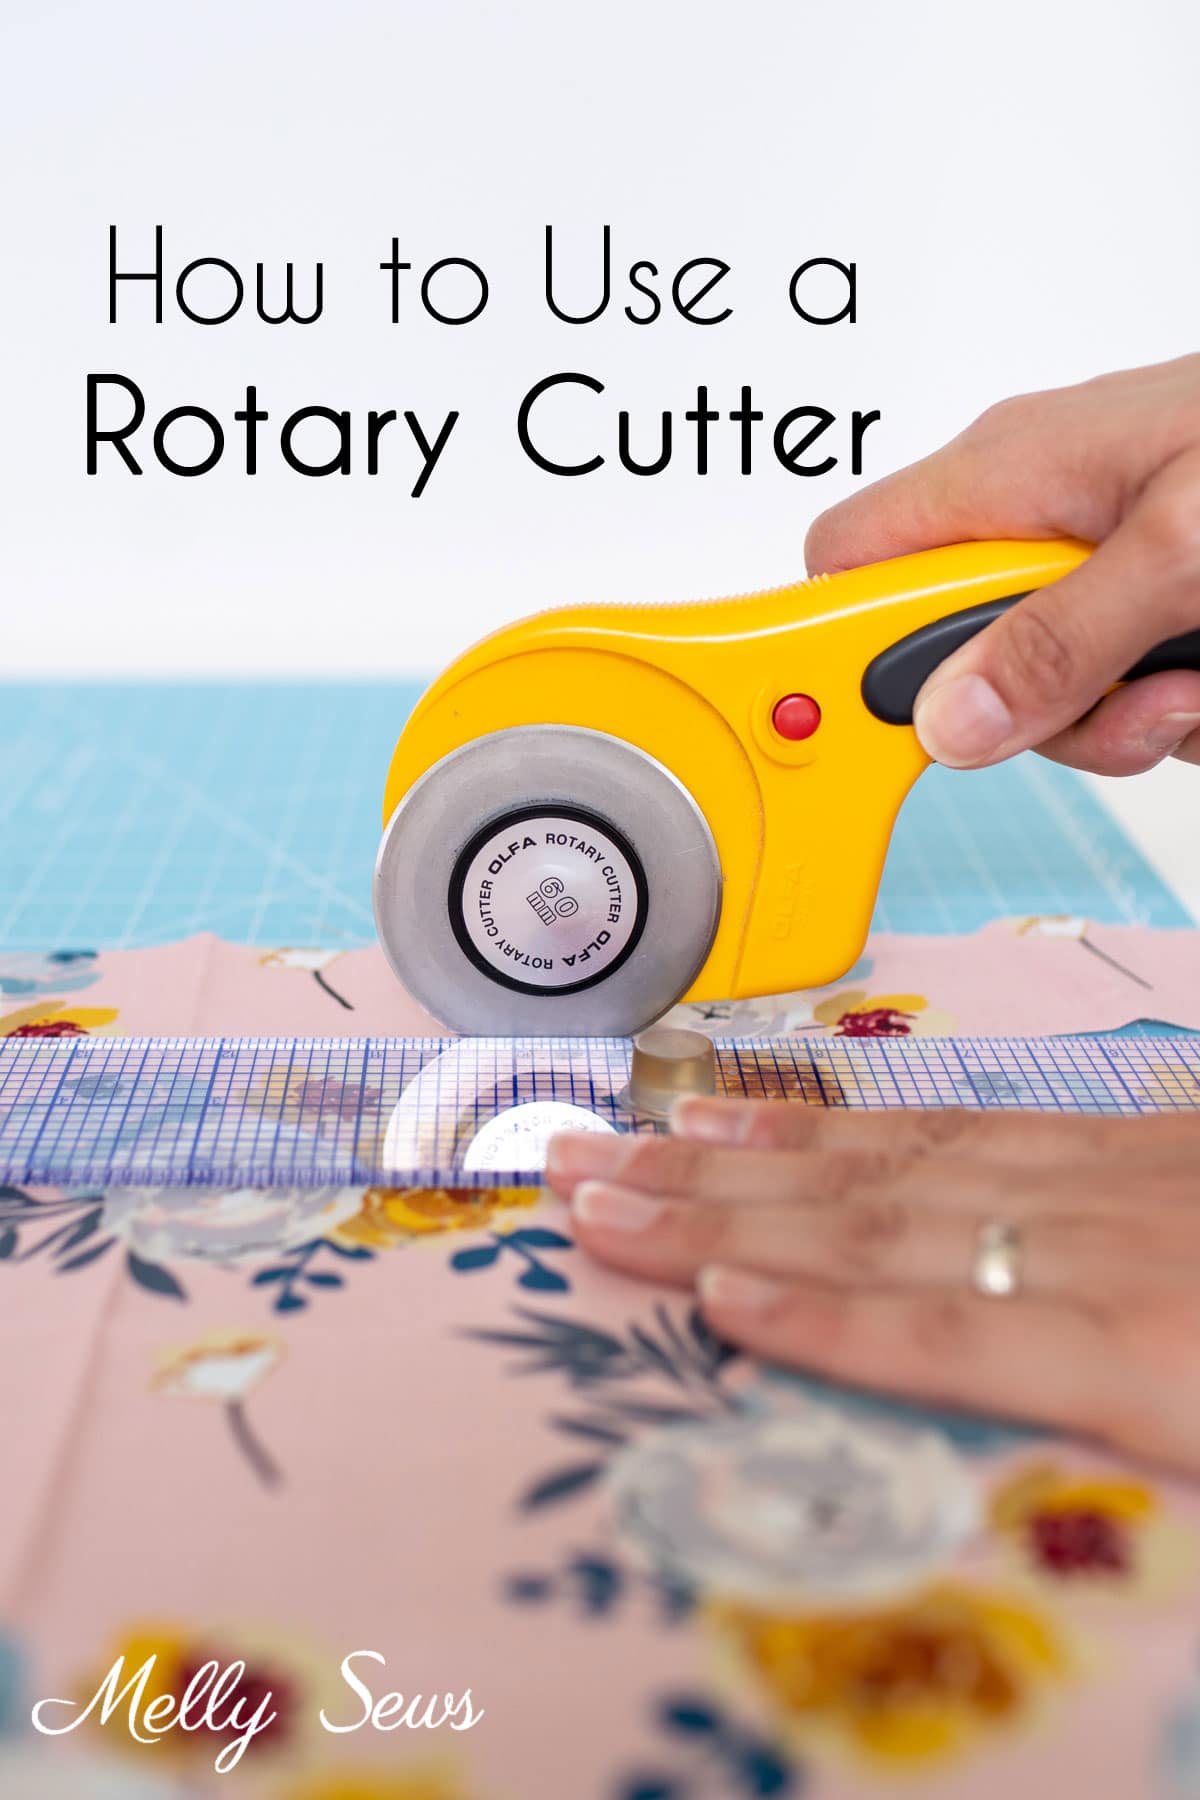 How to Use a Rotary Cutter - Melly Sews